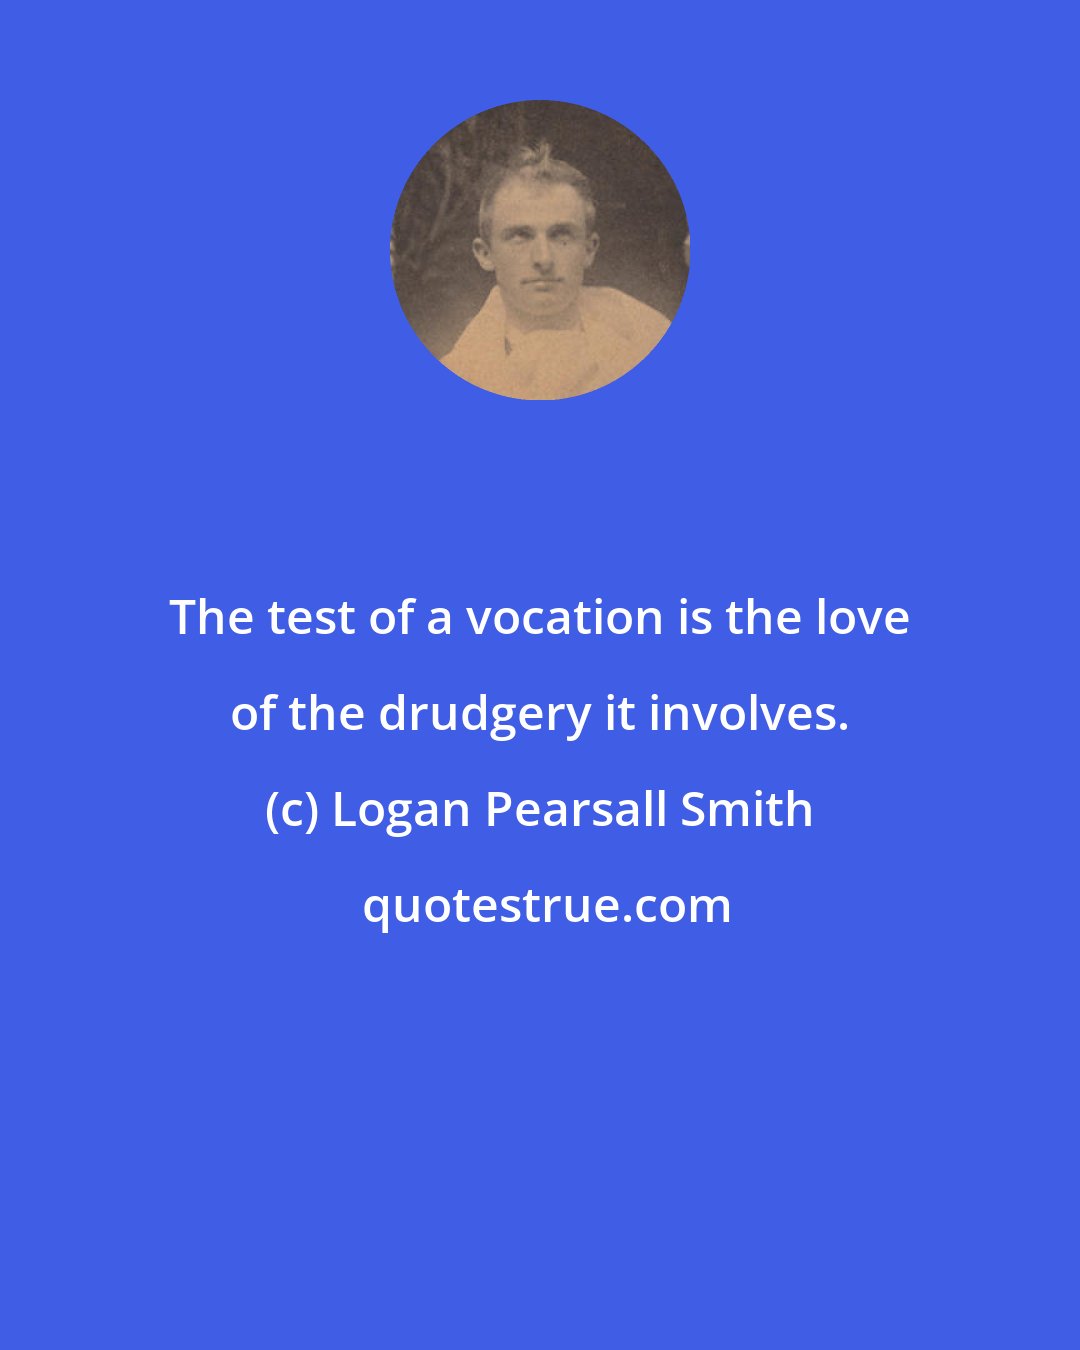 Logan Pearsall Smith: The test of a vocation is the love of the drudgery it involves.